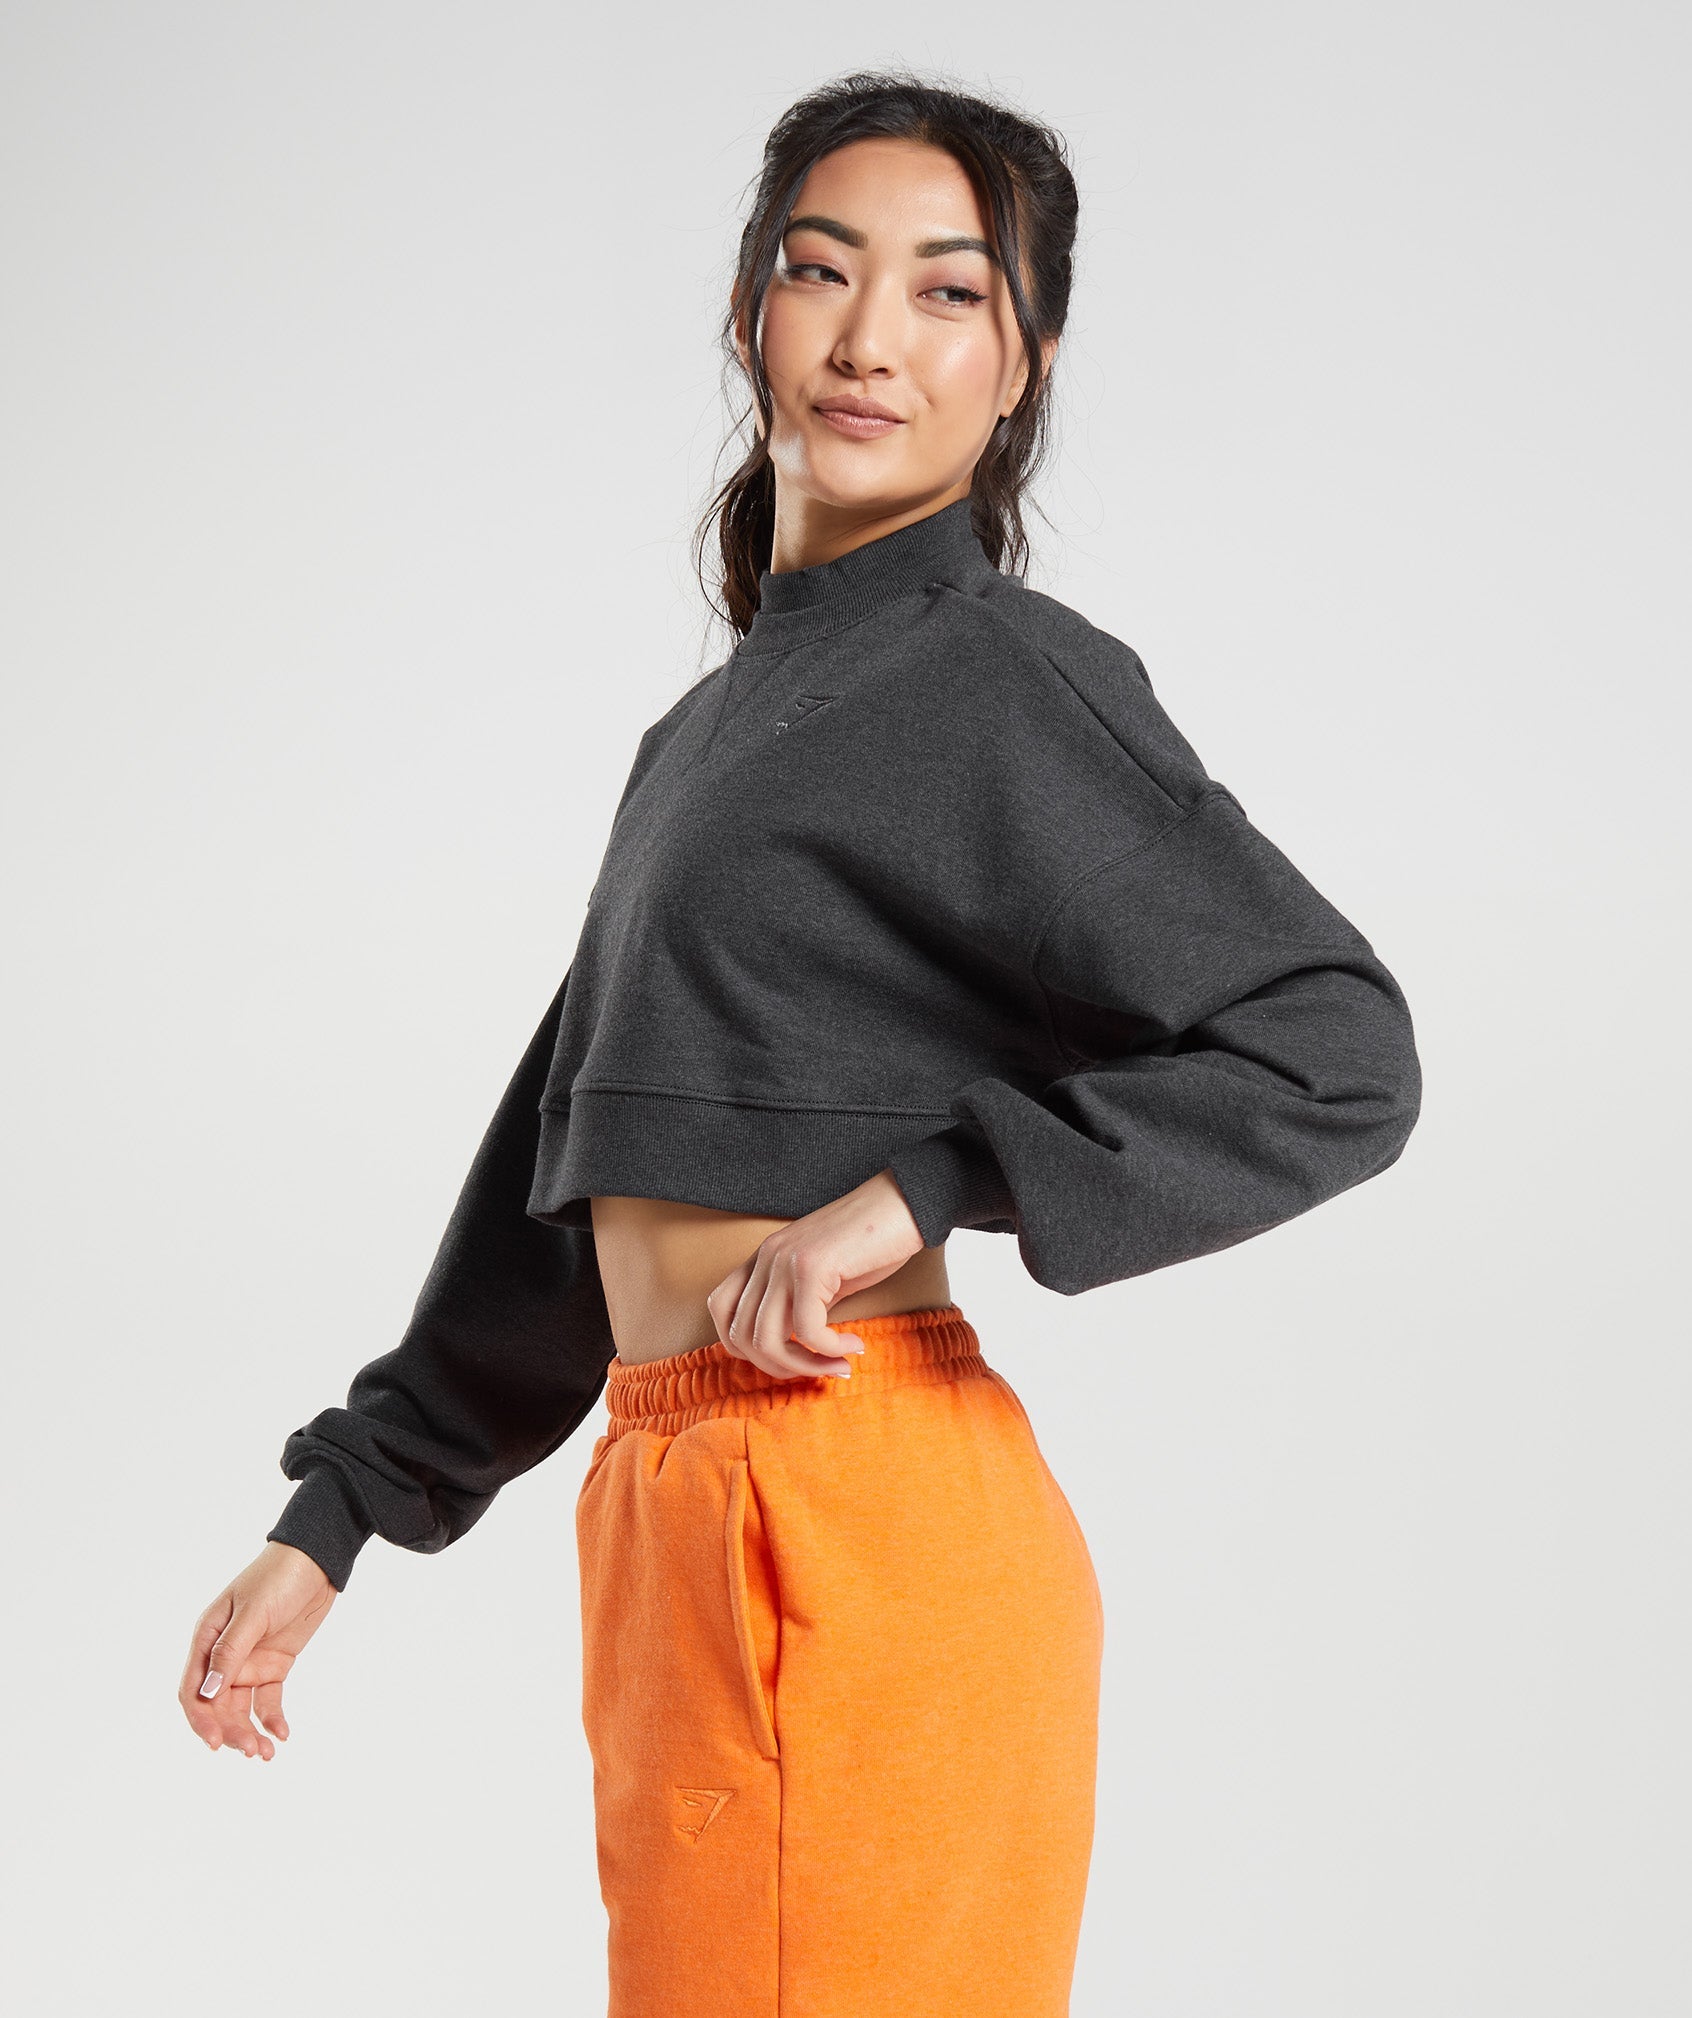 Rest Day Sweats Cropped Pullover in Black Core Marl - view 3